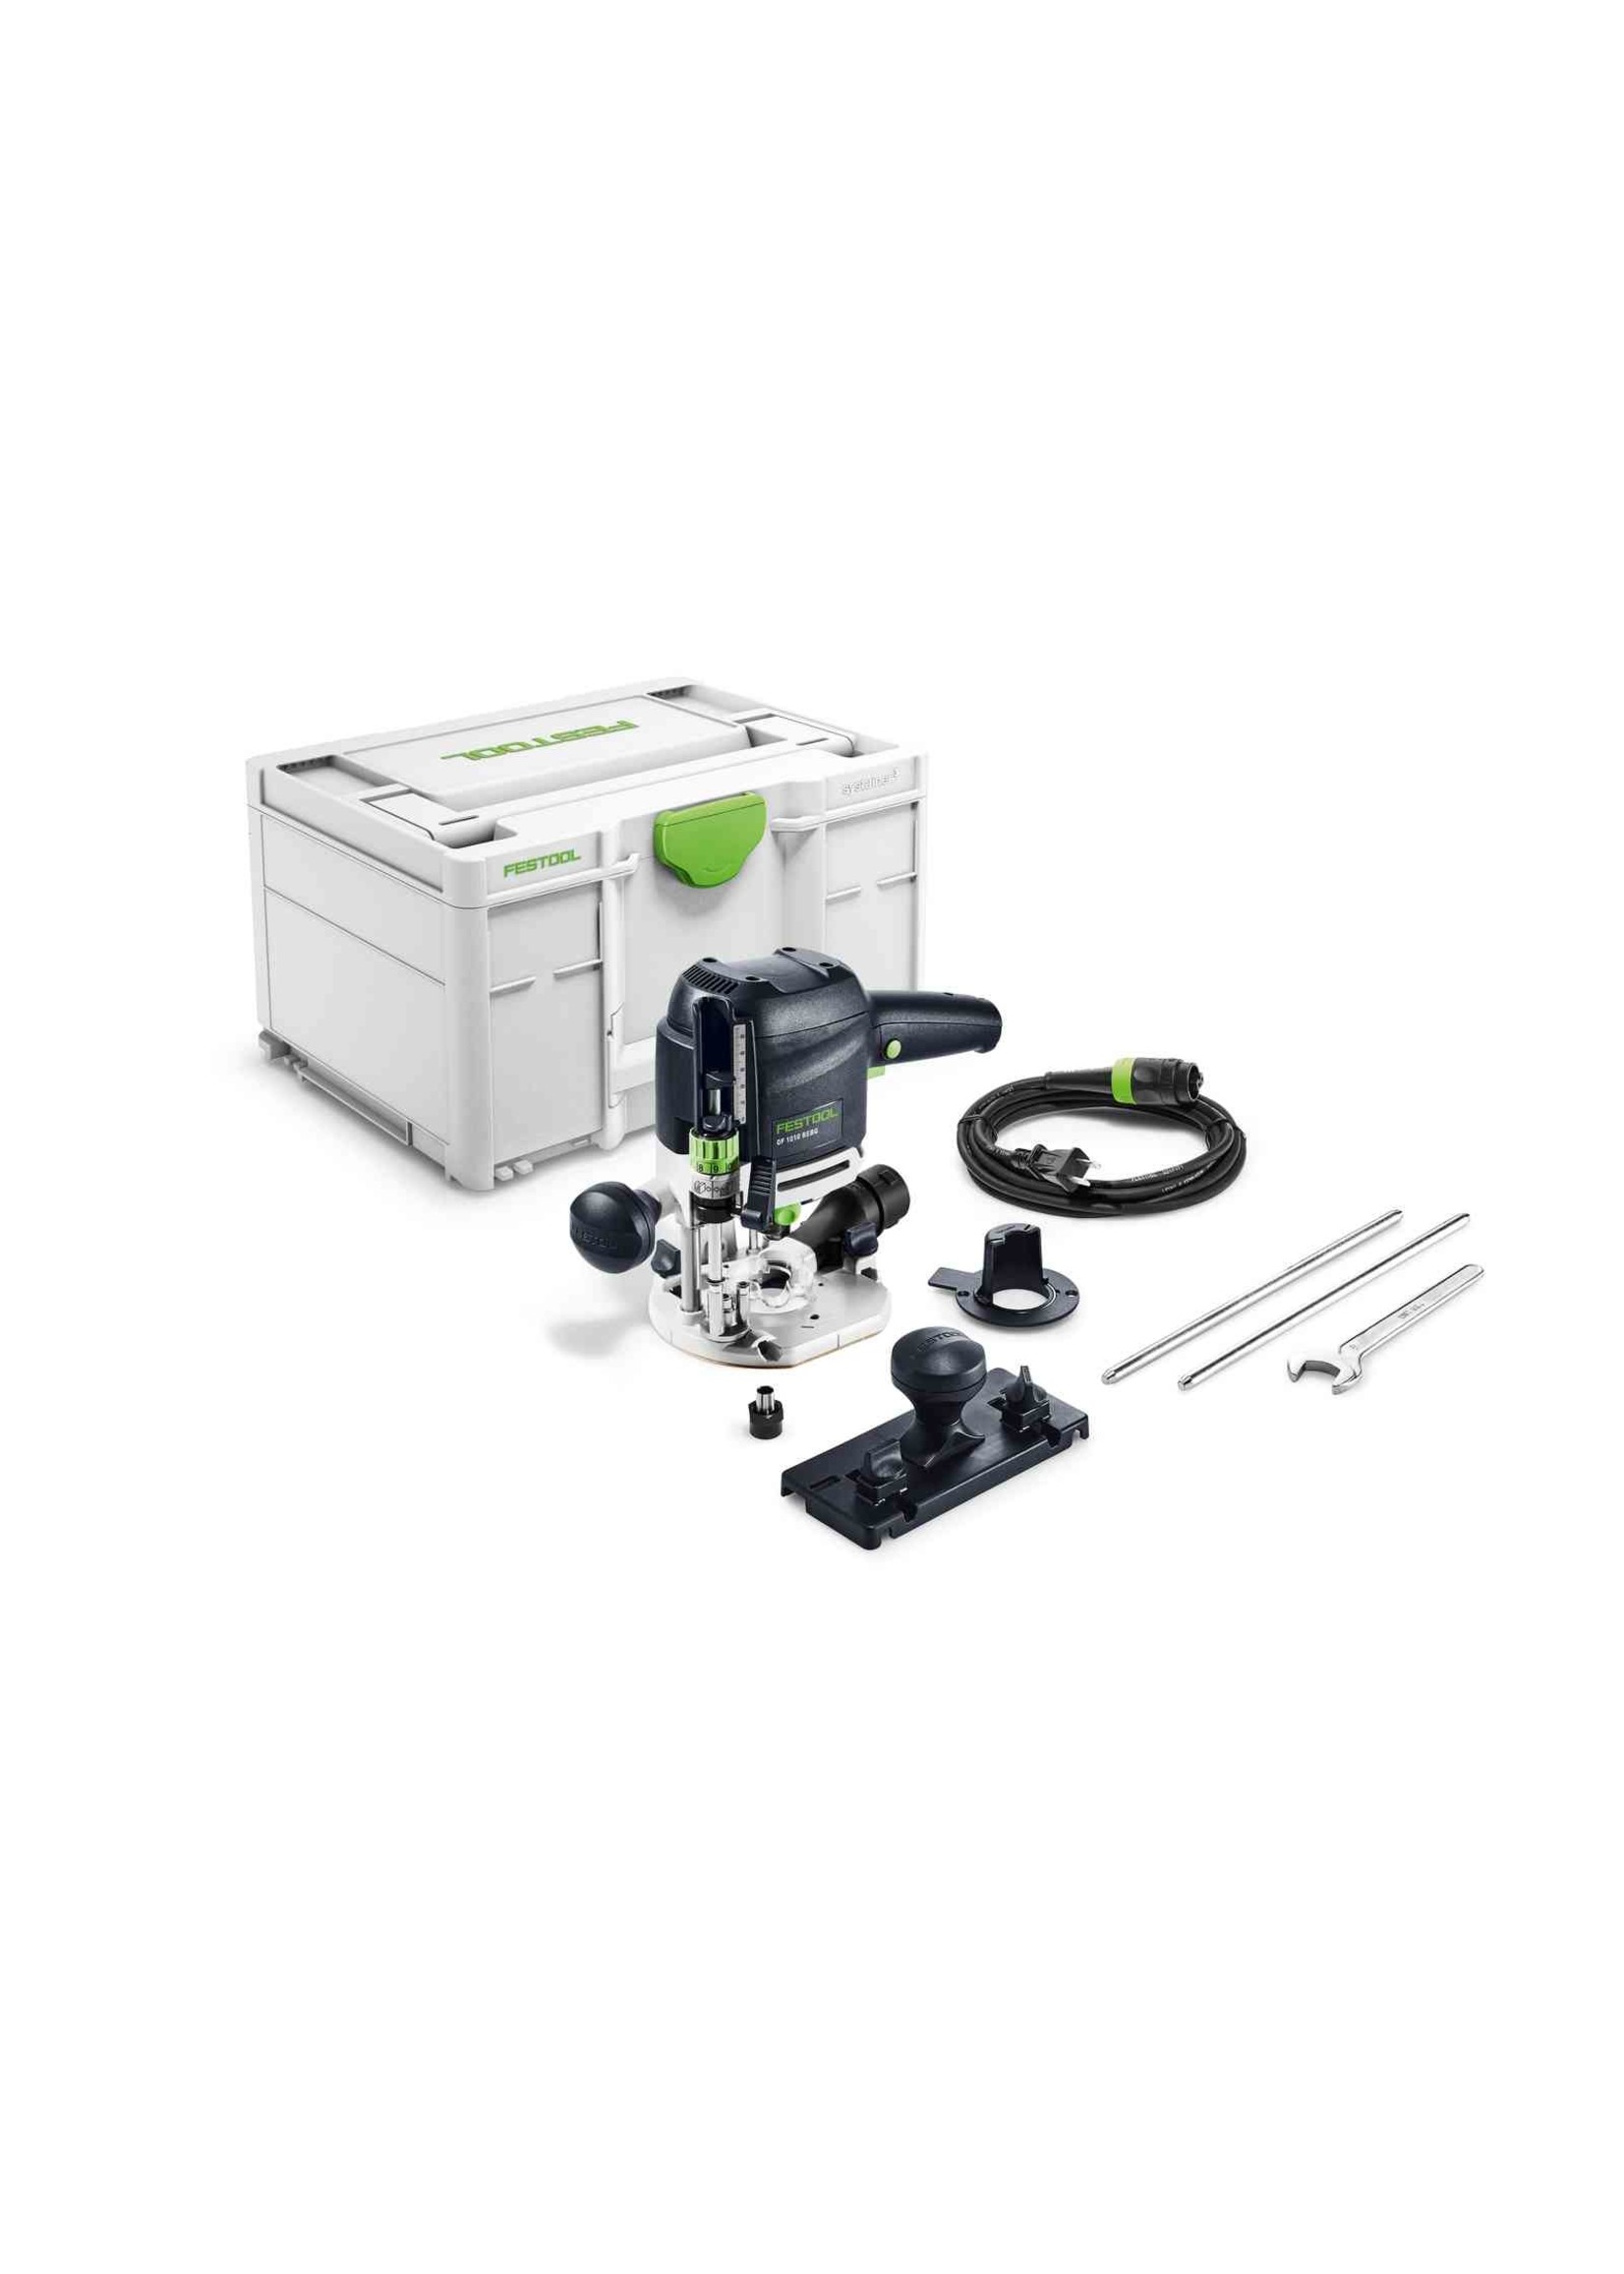 Festool (DISCONTINUED) 576922 Router          OF 1010 REQ-F-Plus US